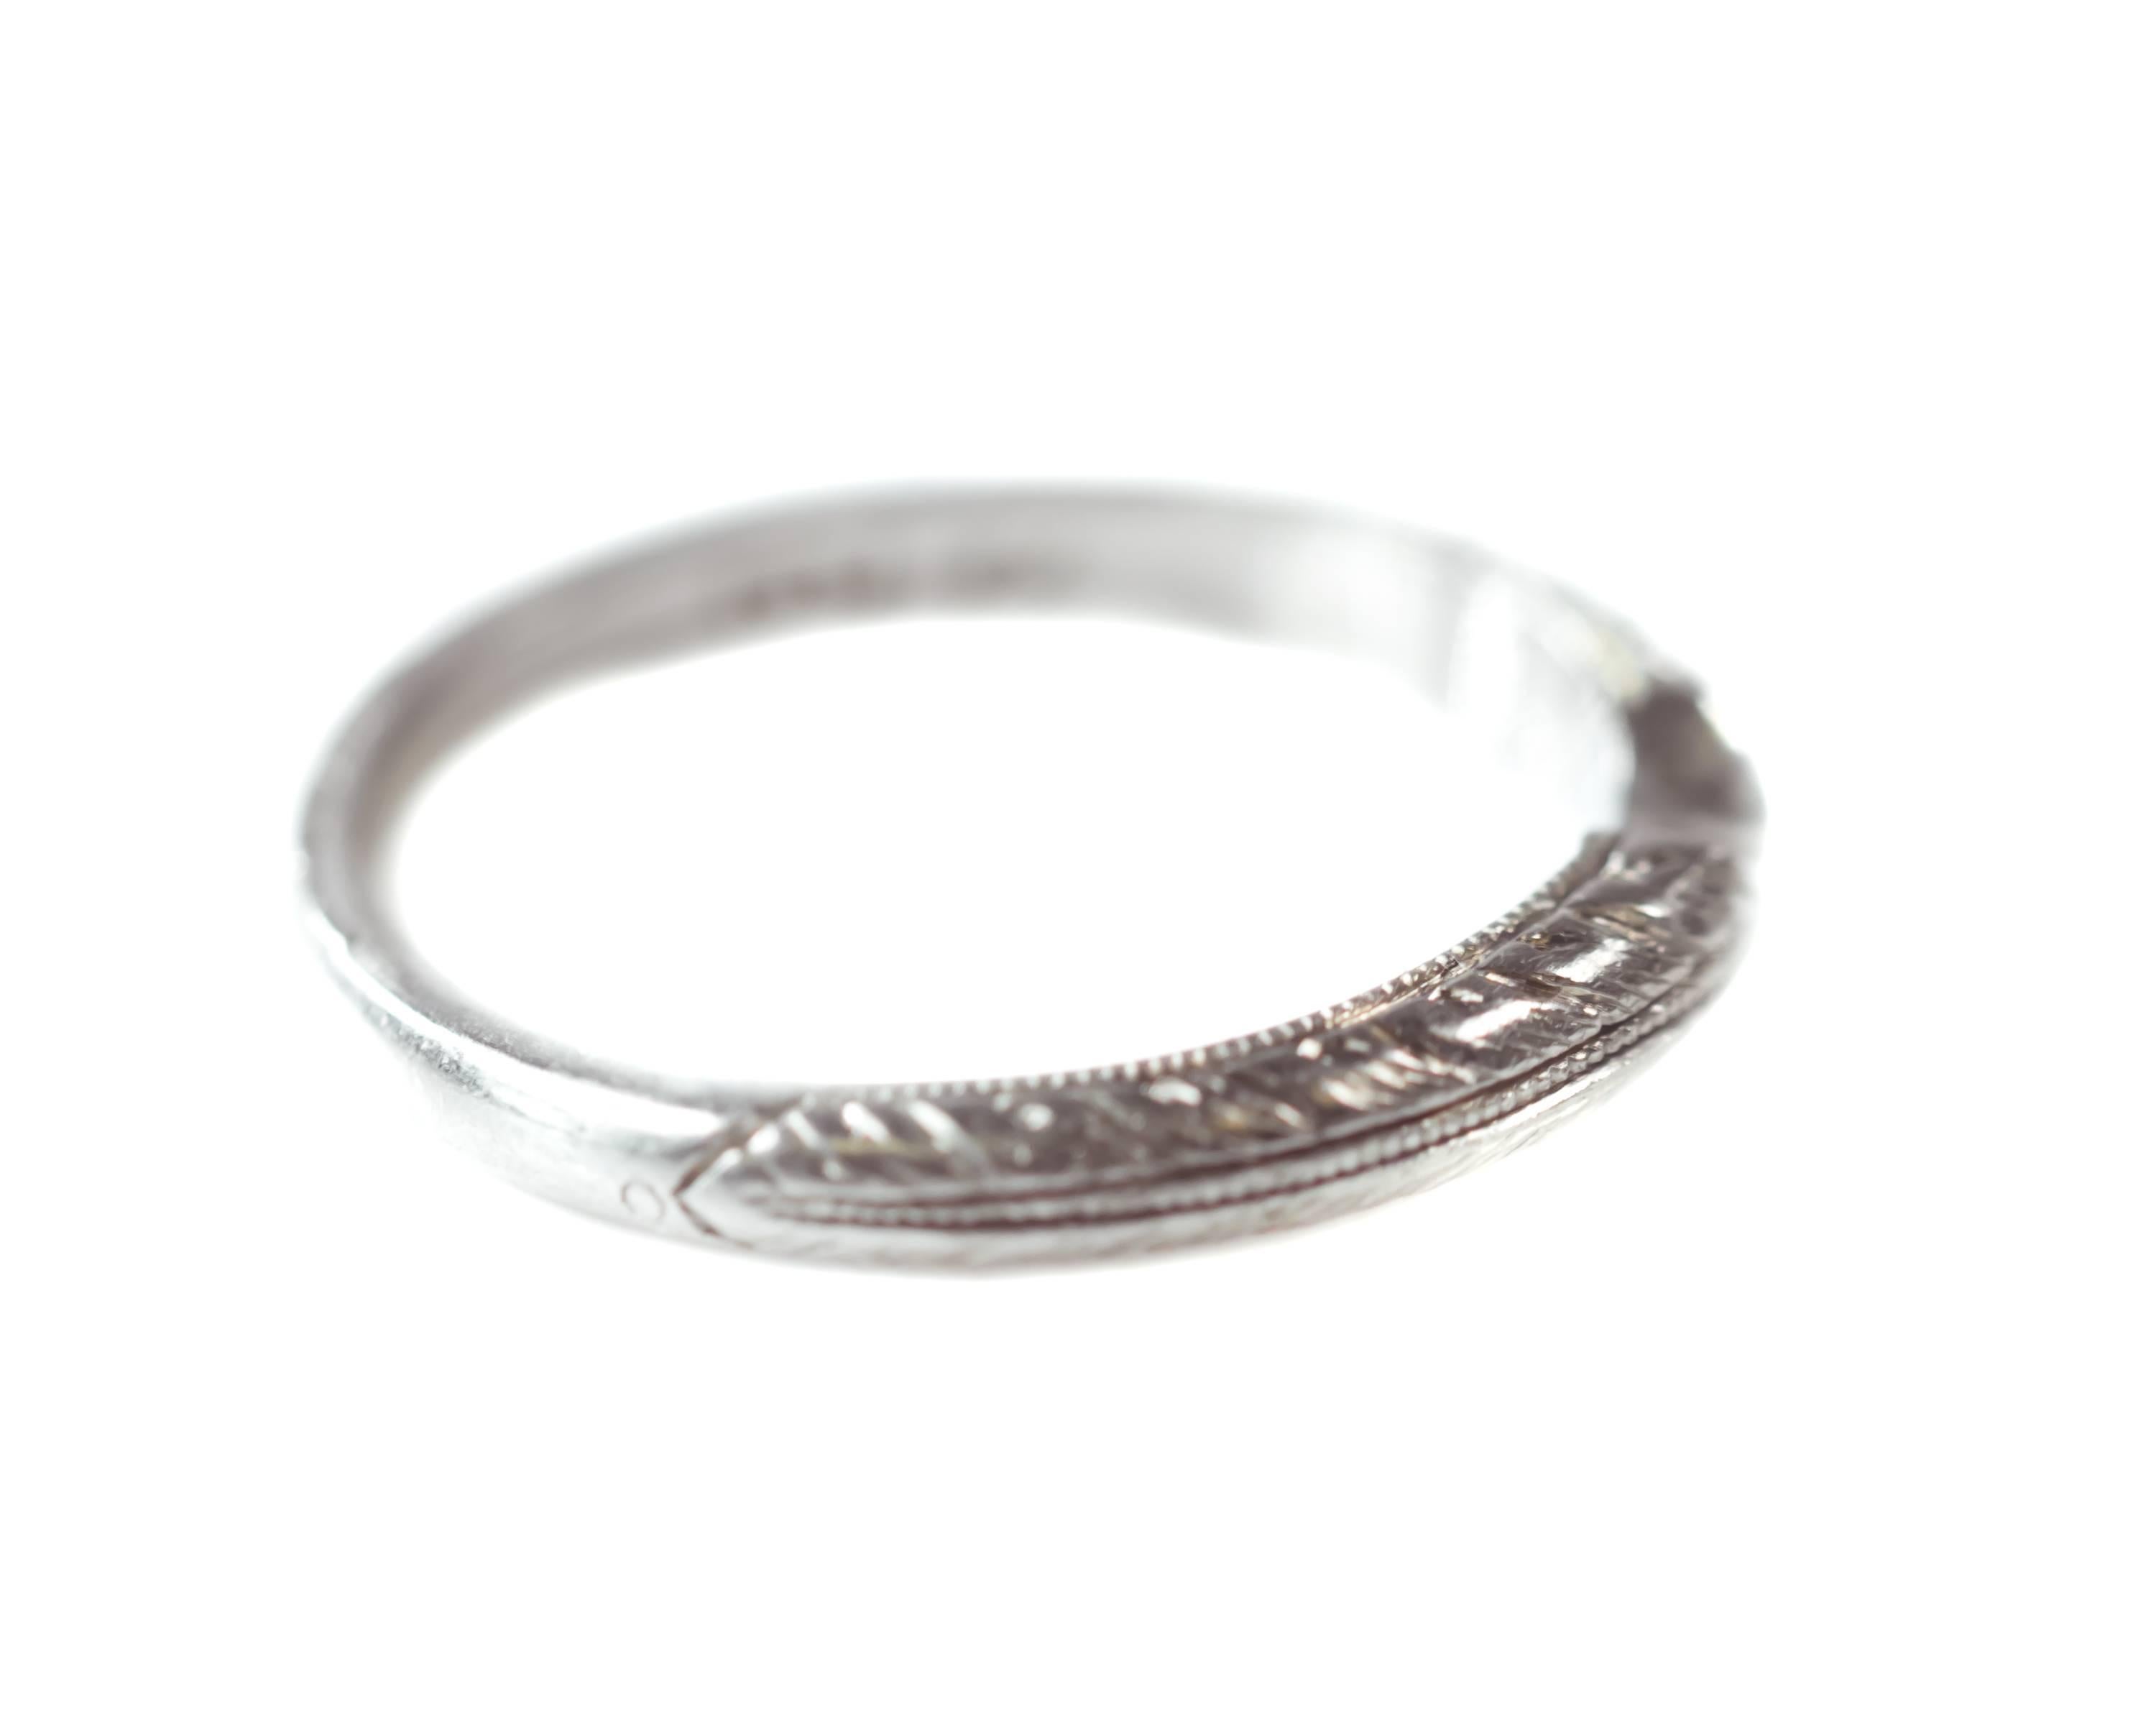 1960s Retro Curved Wedding Band - Platinum

Features a delicate etched pattern along the front half of the shank. The upper and lower edges of the band are etched with a delicate feather pattern. The feather pattern frames the fine milgrain work